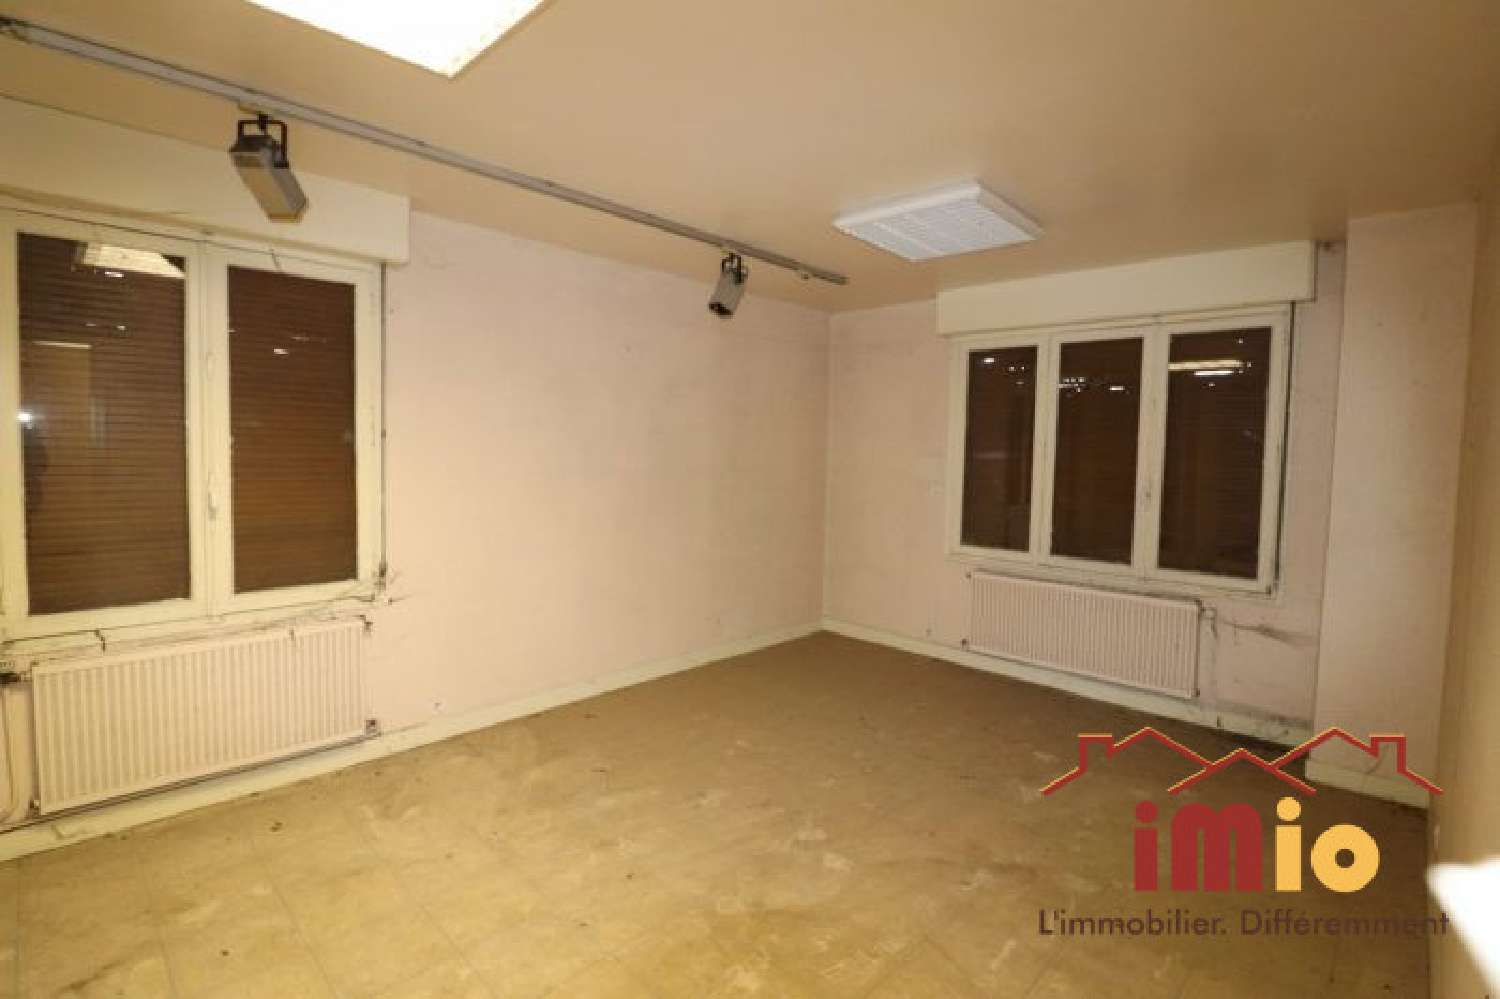  for sale apartment Isles-sur-Suippe Marne 2